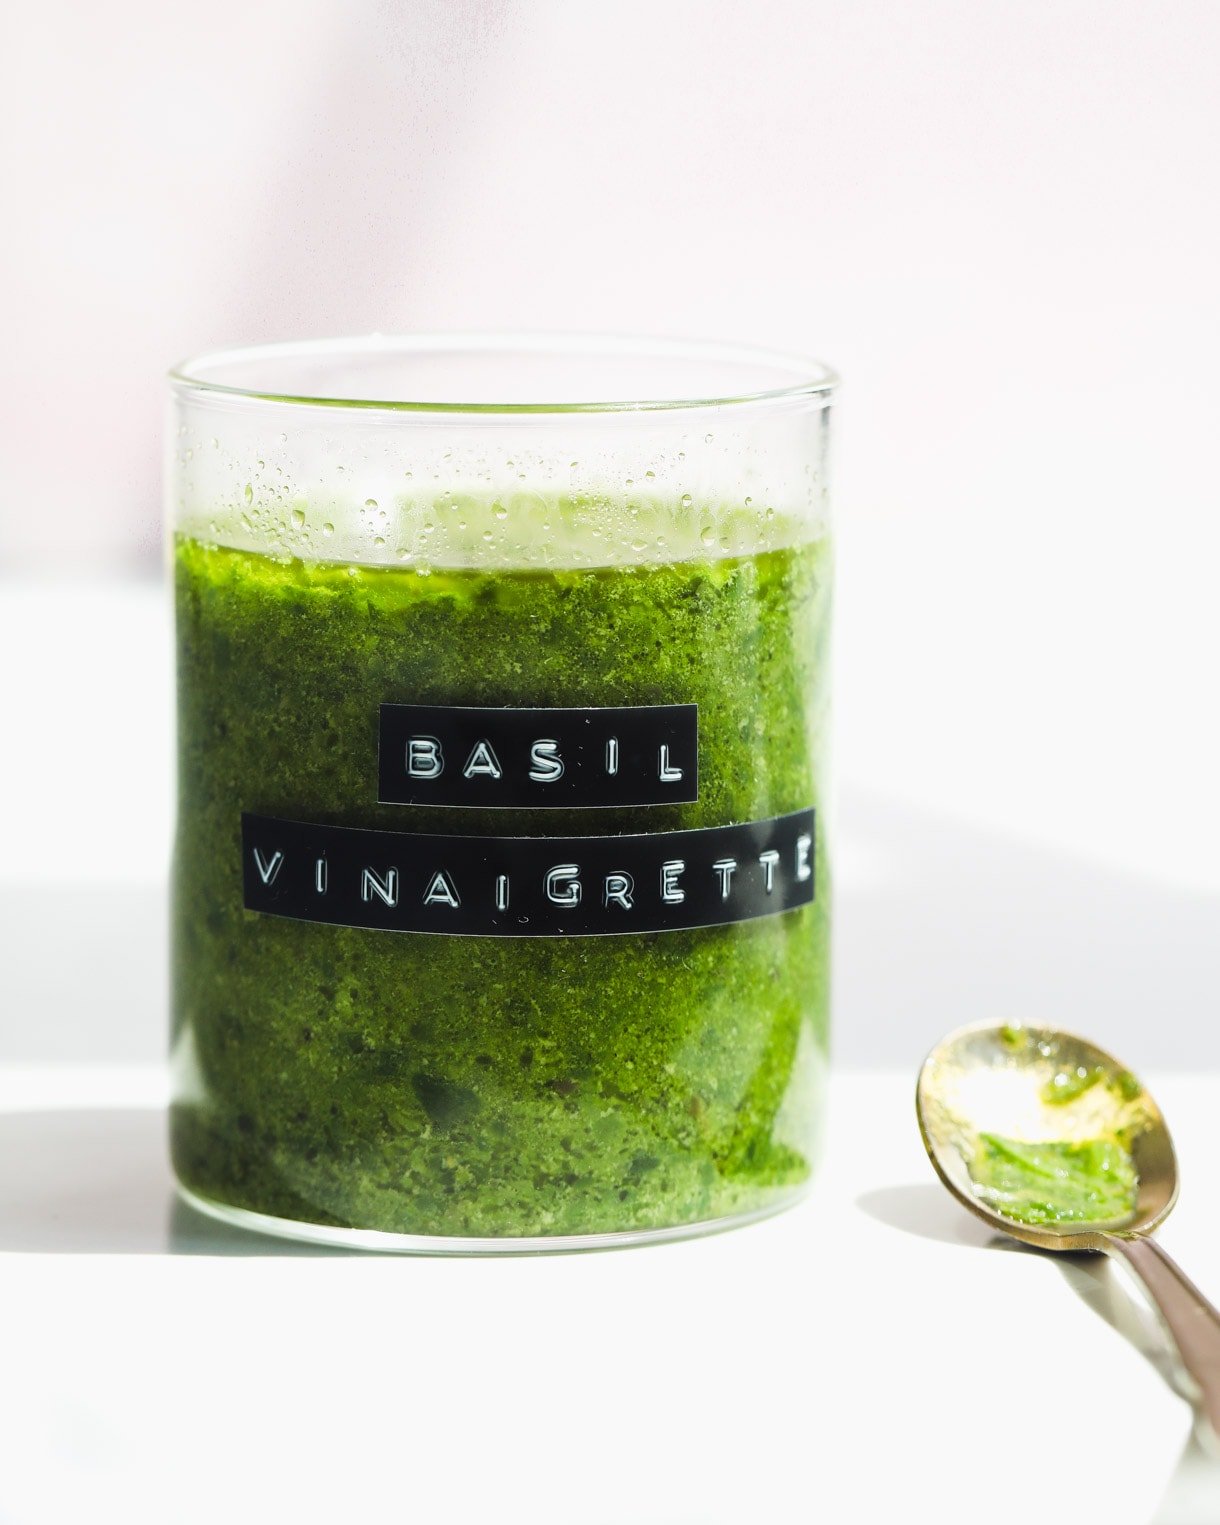 basil vinaigrette in a glass jar with gold spoon next to it